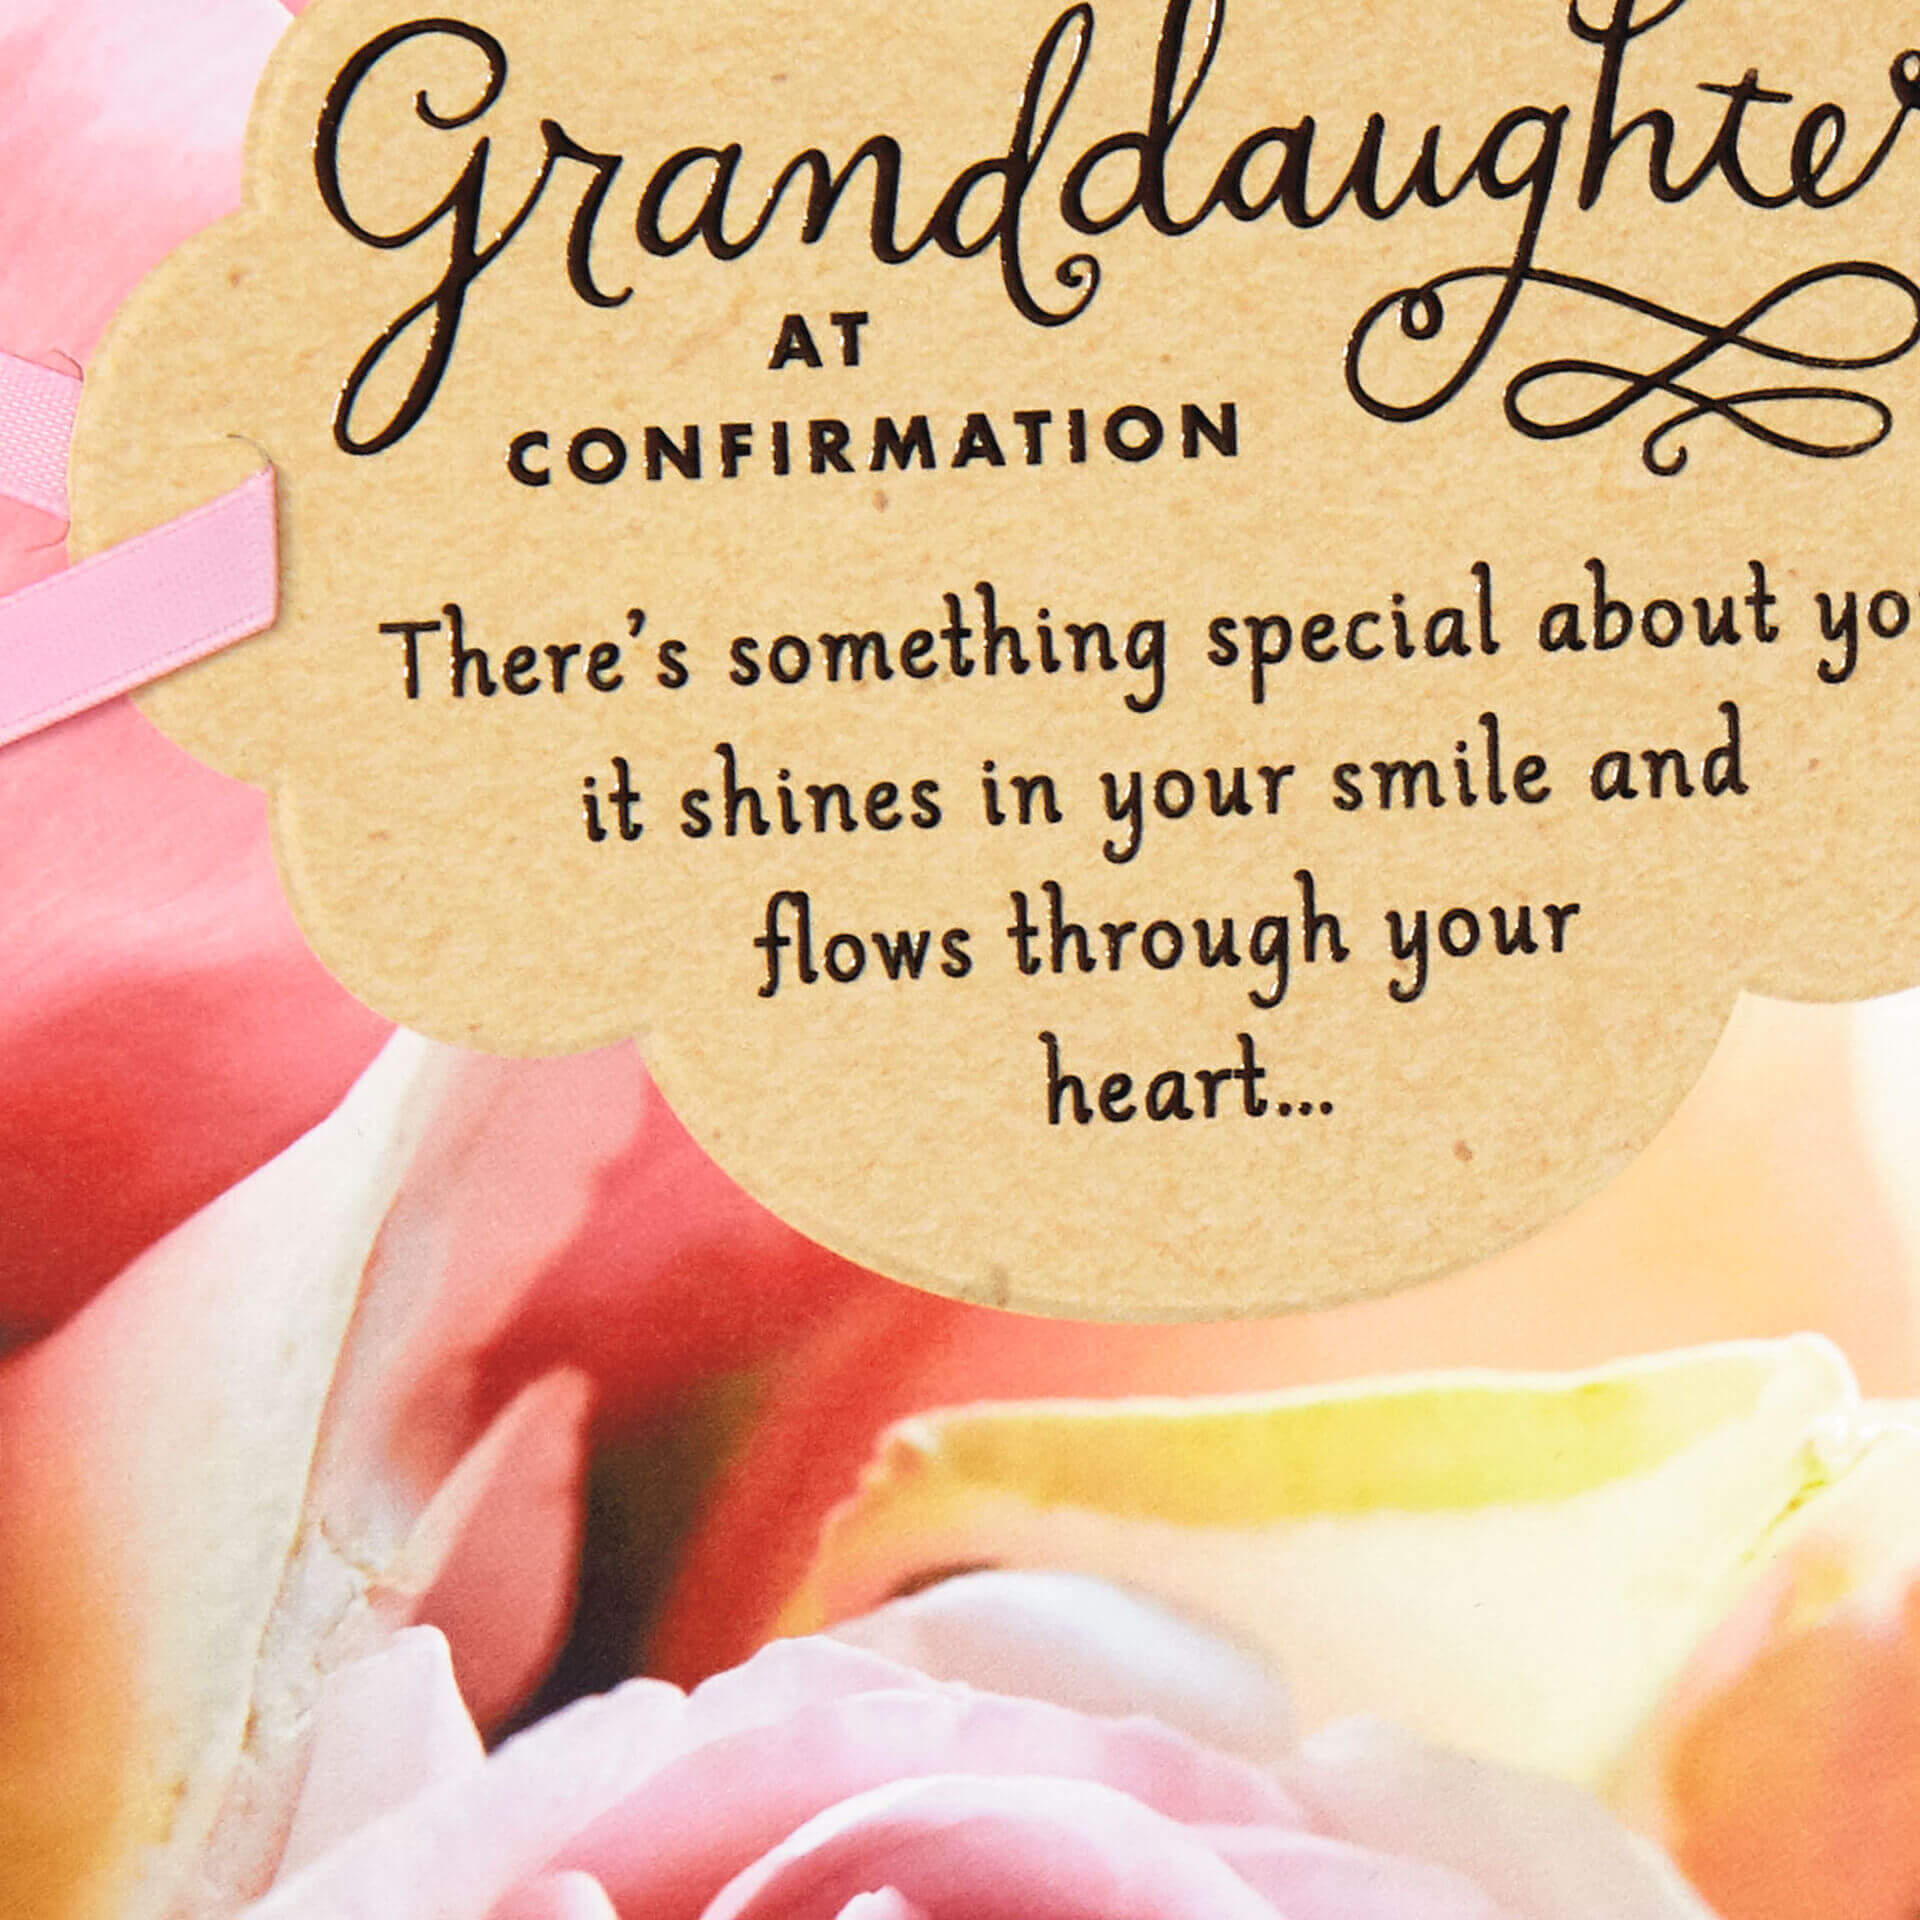 7-confirmation-wishes-for-granddaughter-90-lovehome